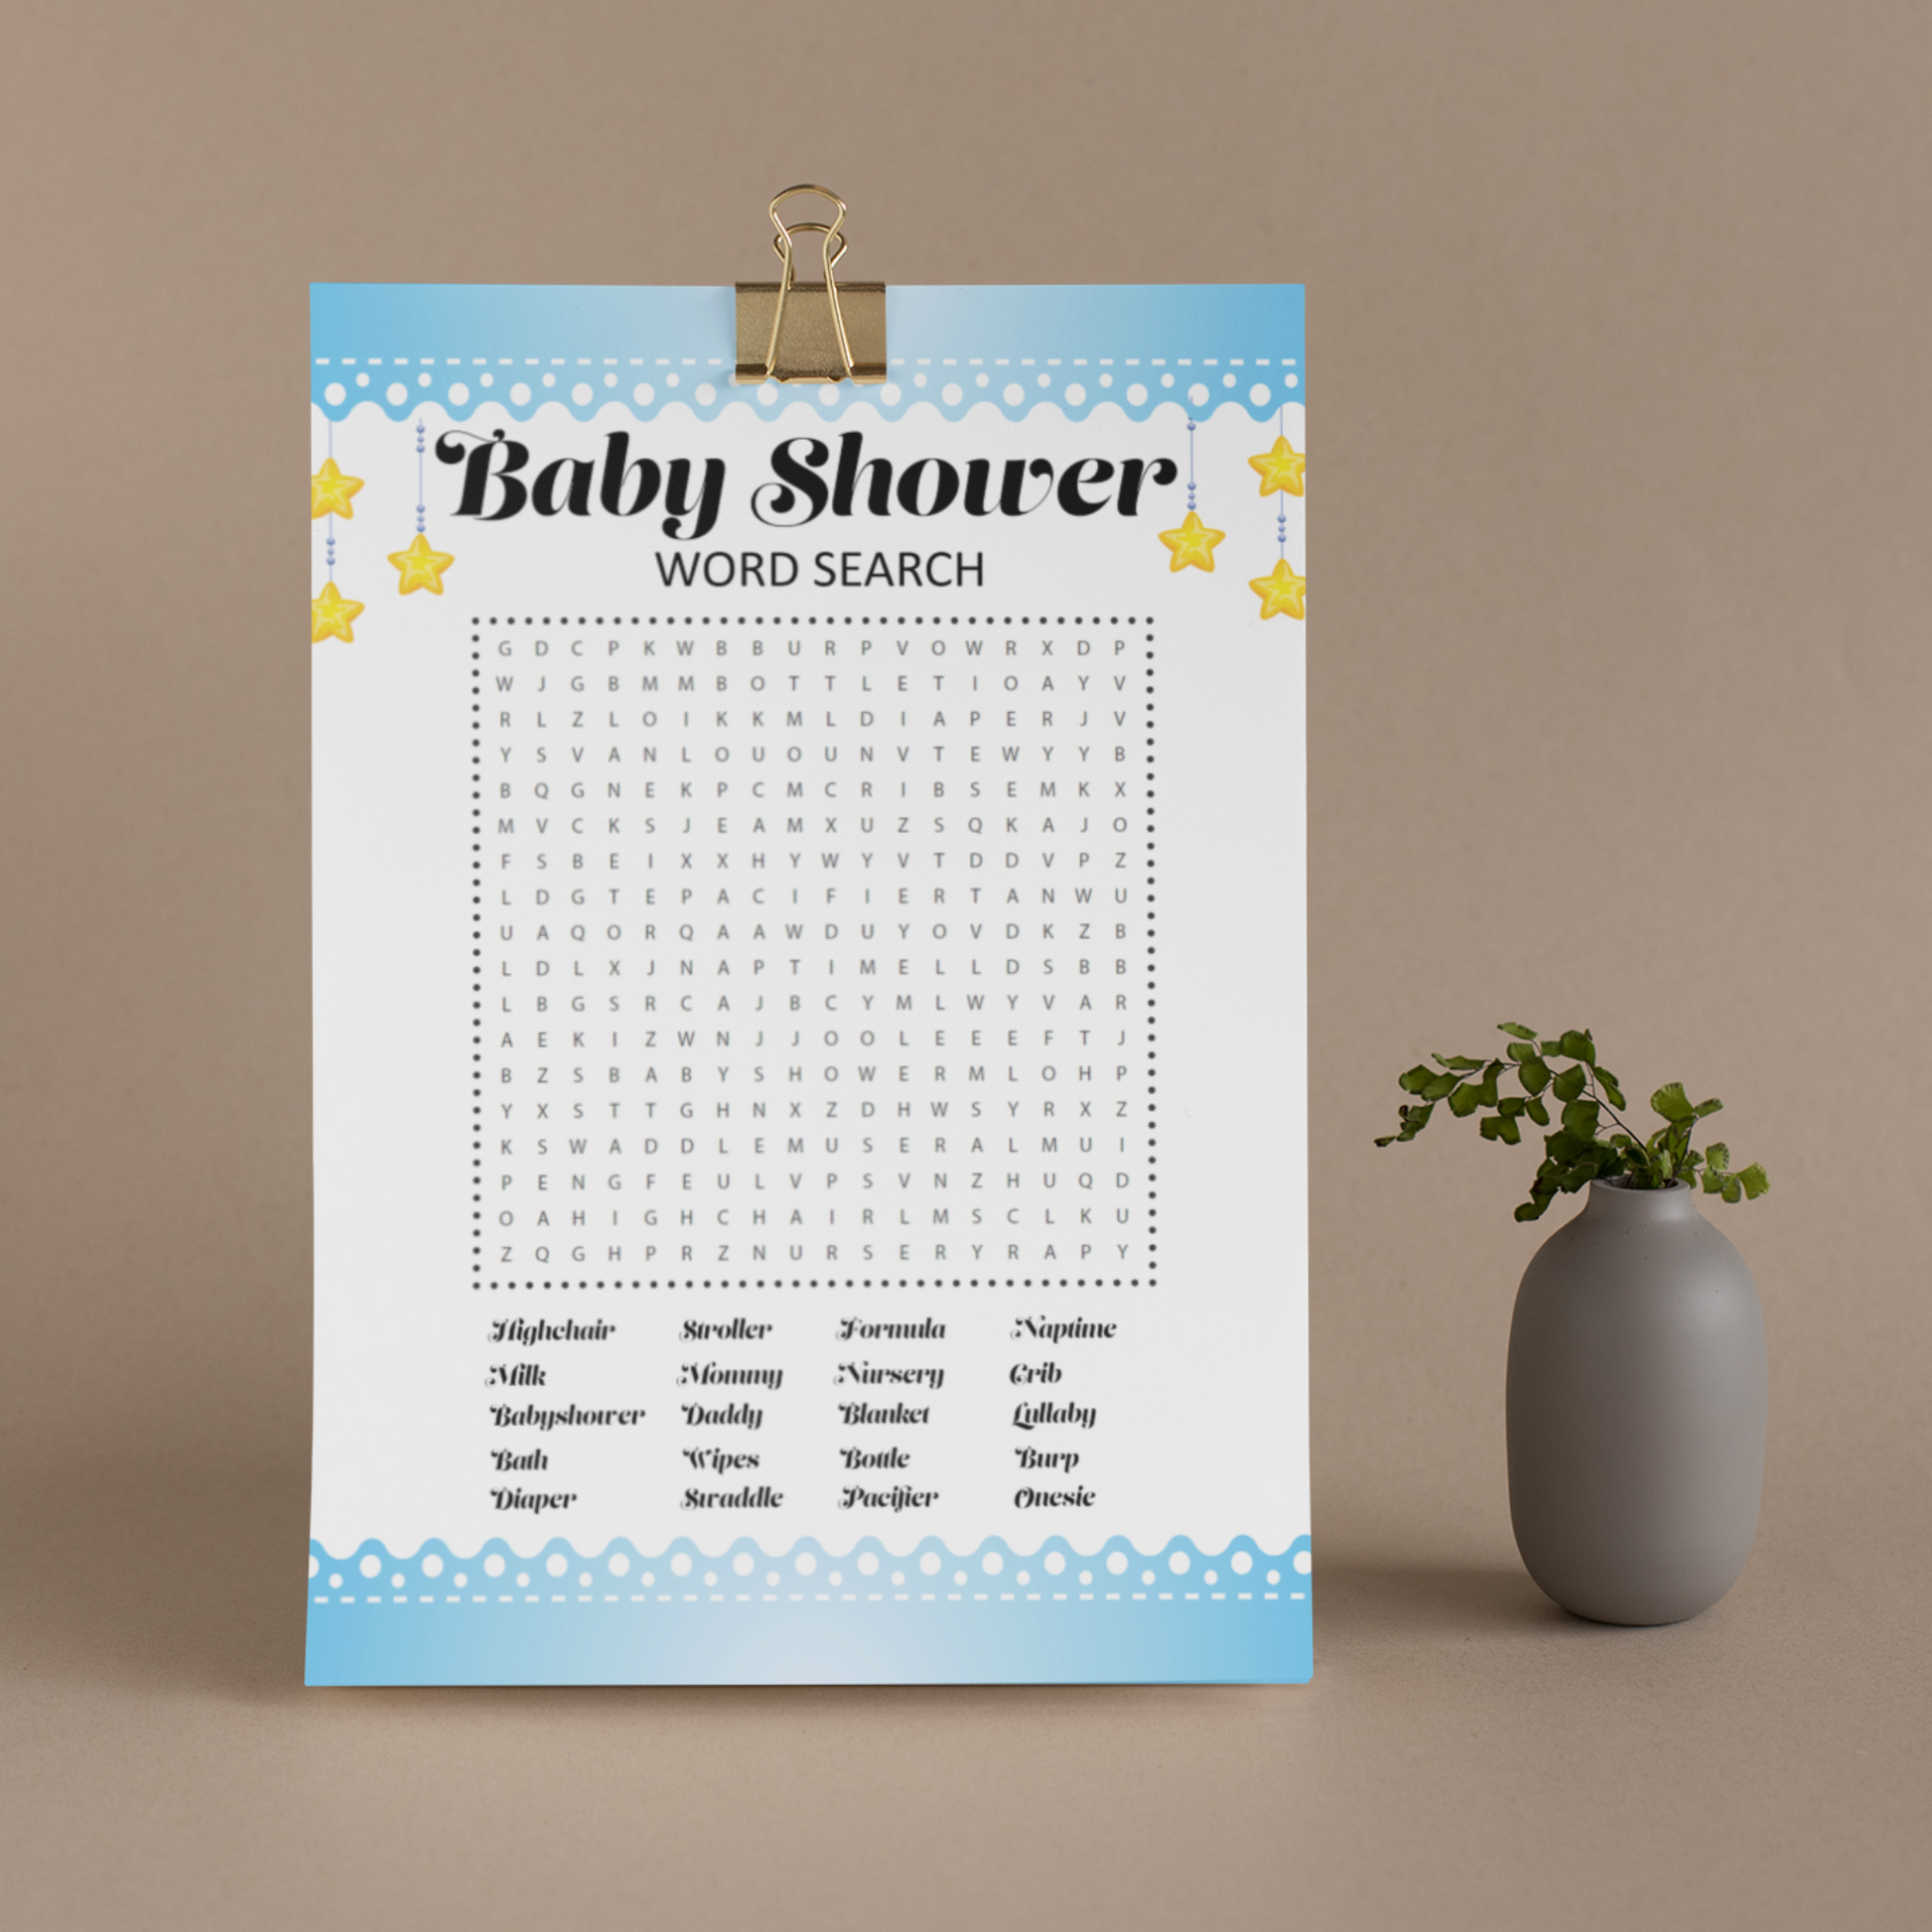 Word Search Game for Baby Shower Printable - Blue - Droo & Aya